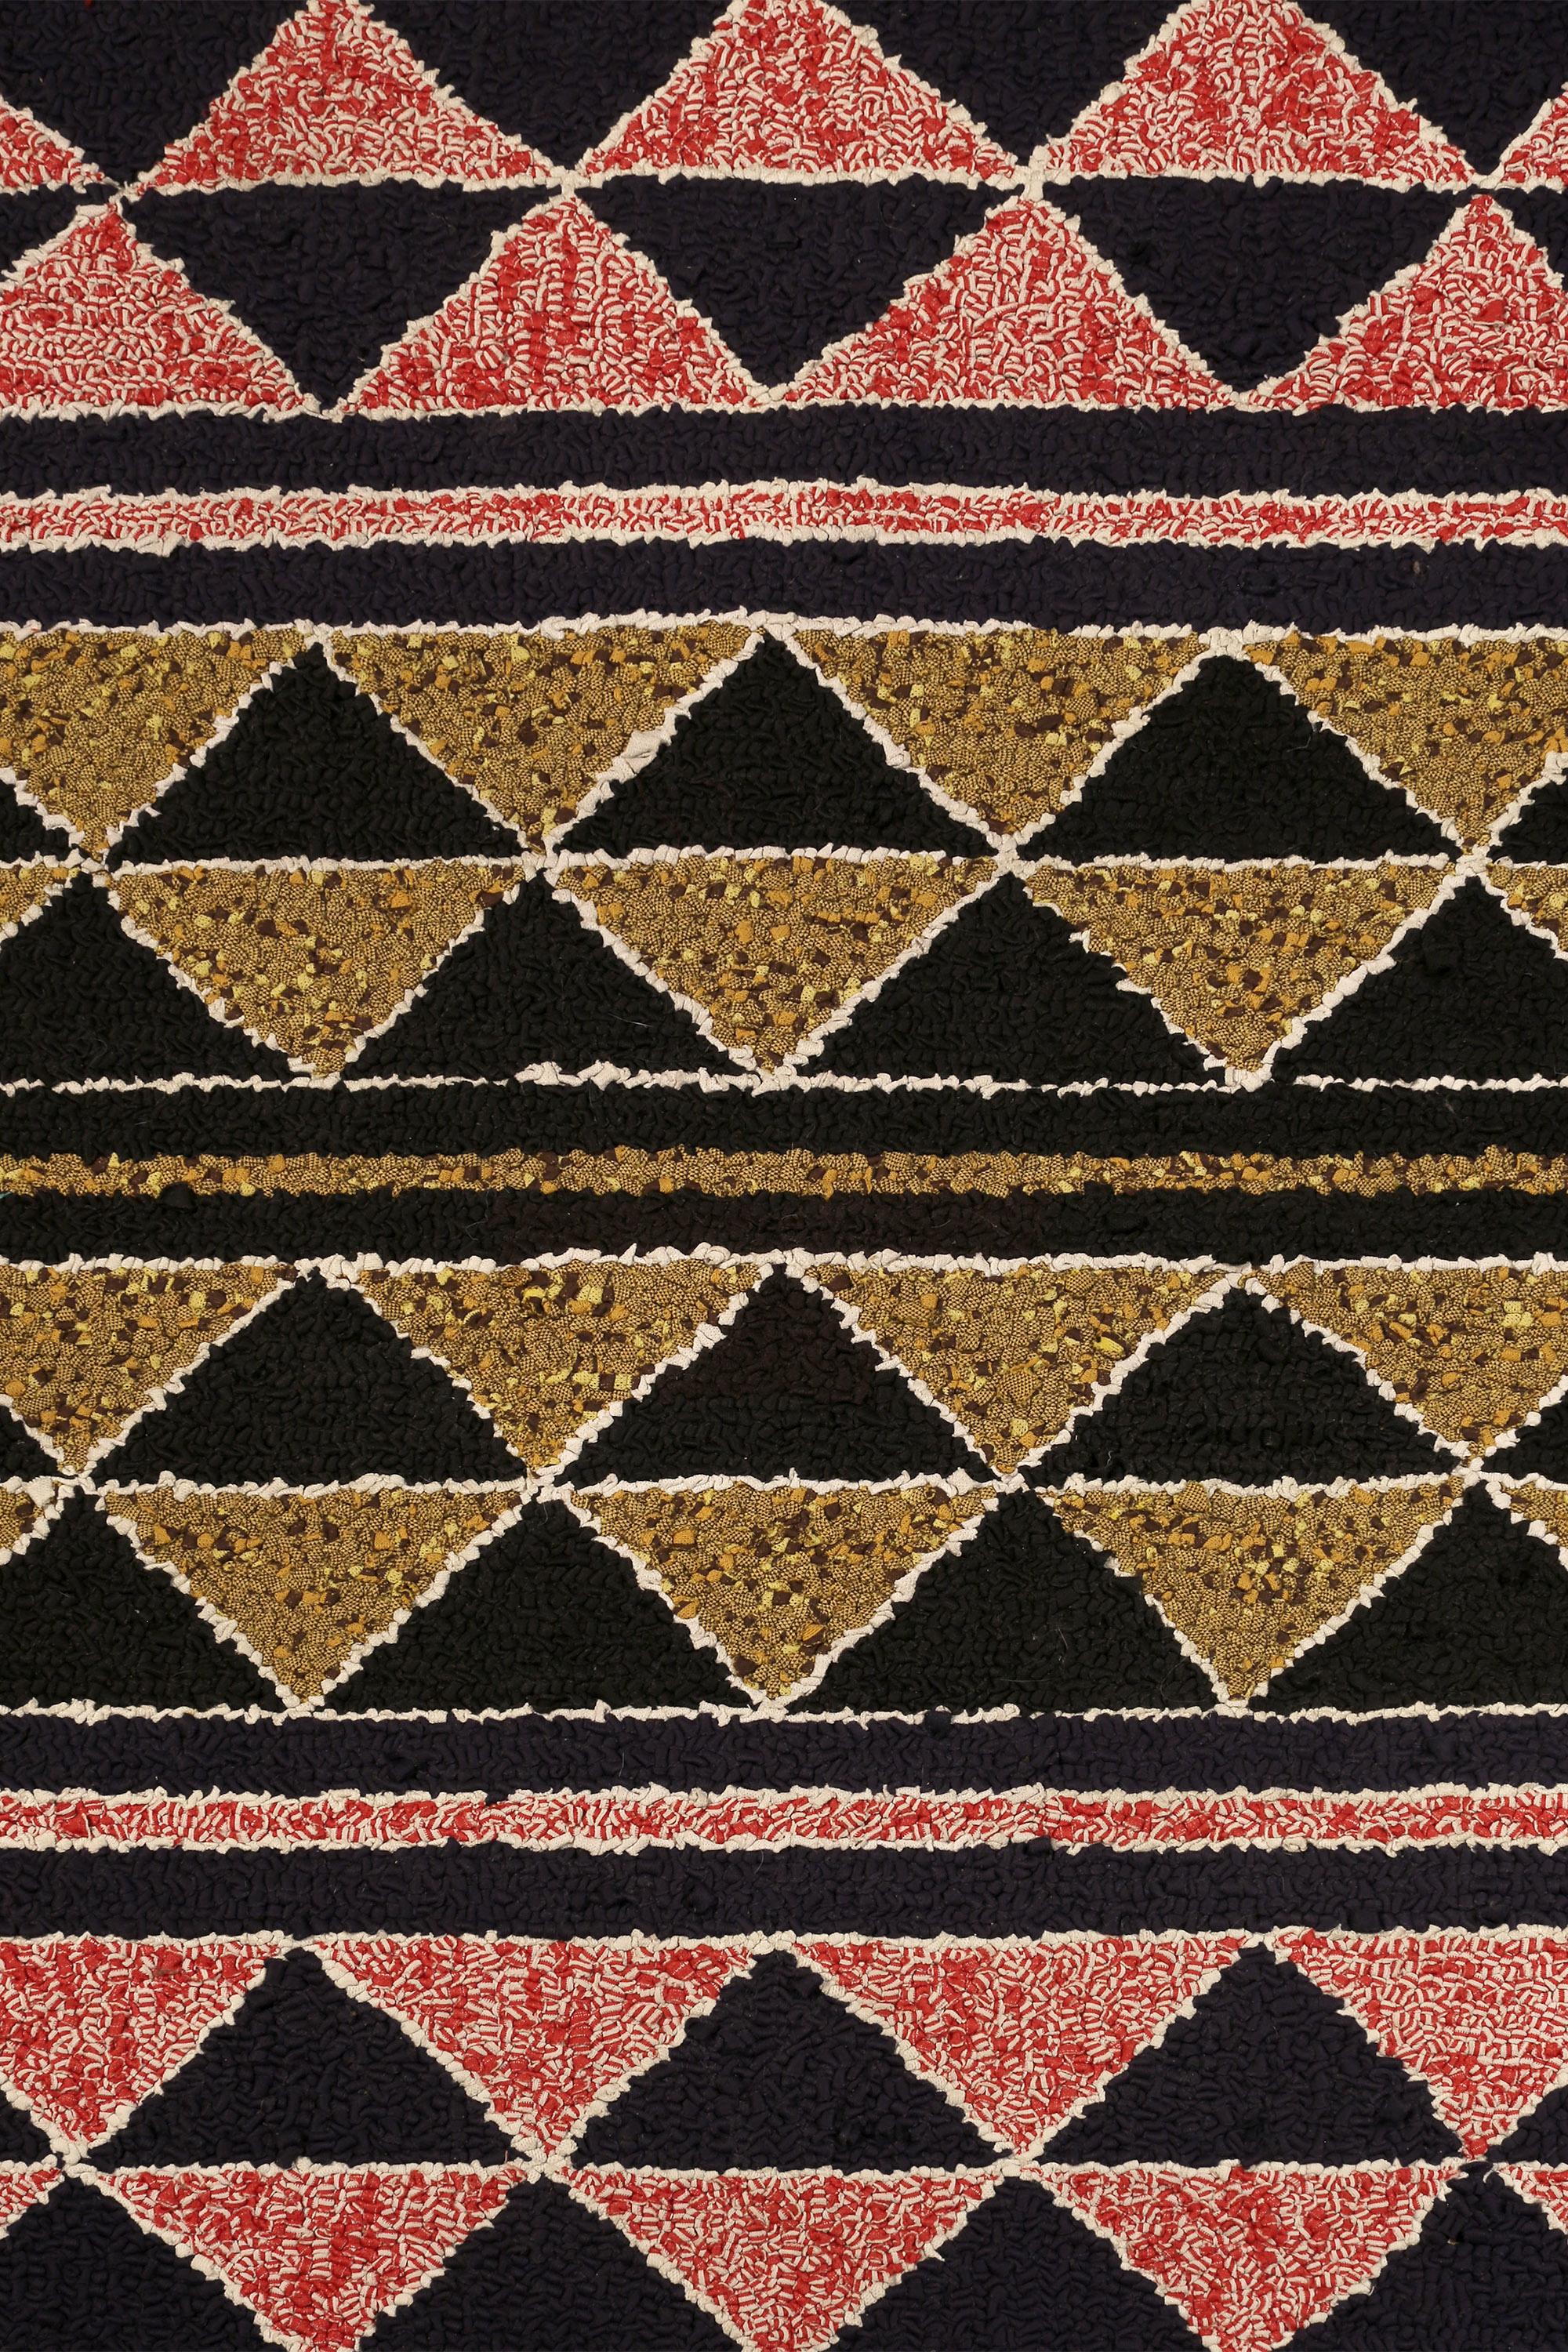 Hand-Woven Mid-20th Century American Hooked Rug with Reciprocating Triangle Motif For Sale